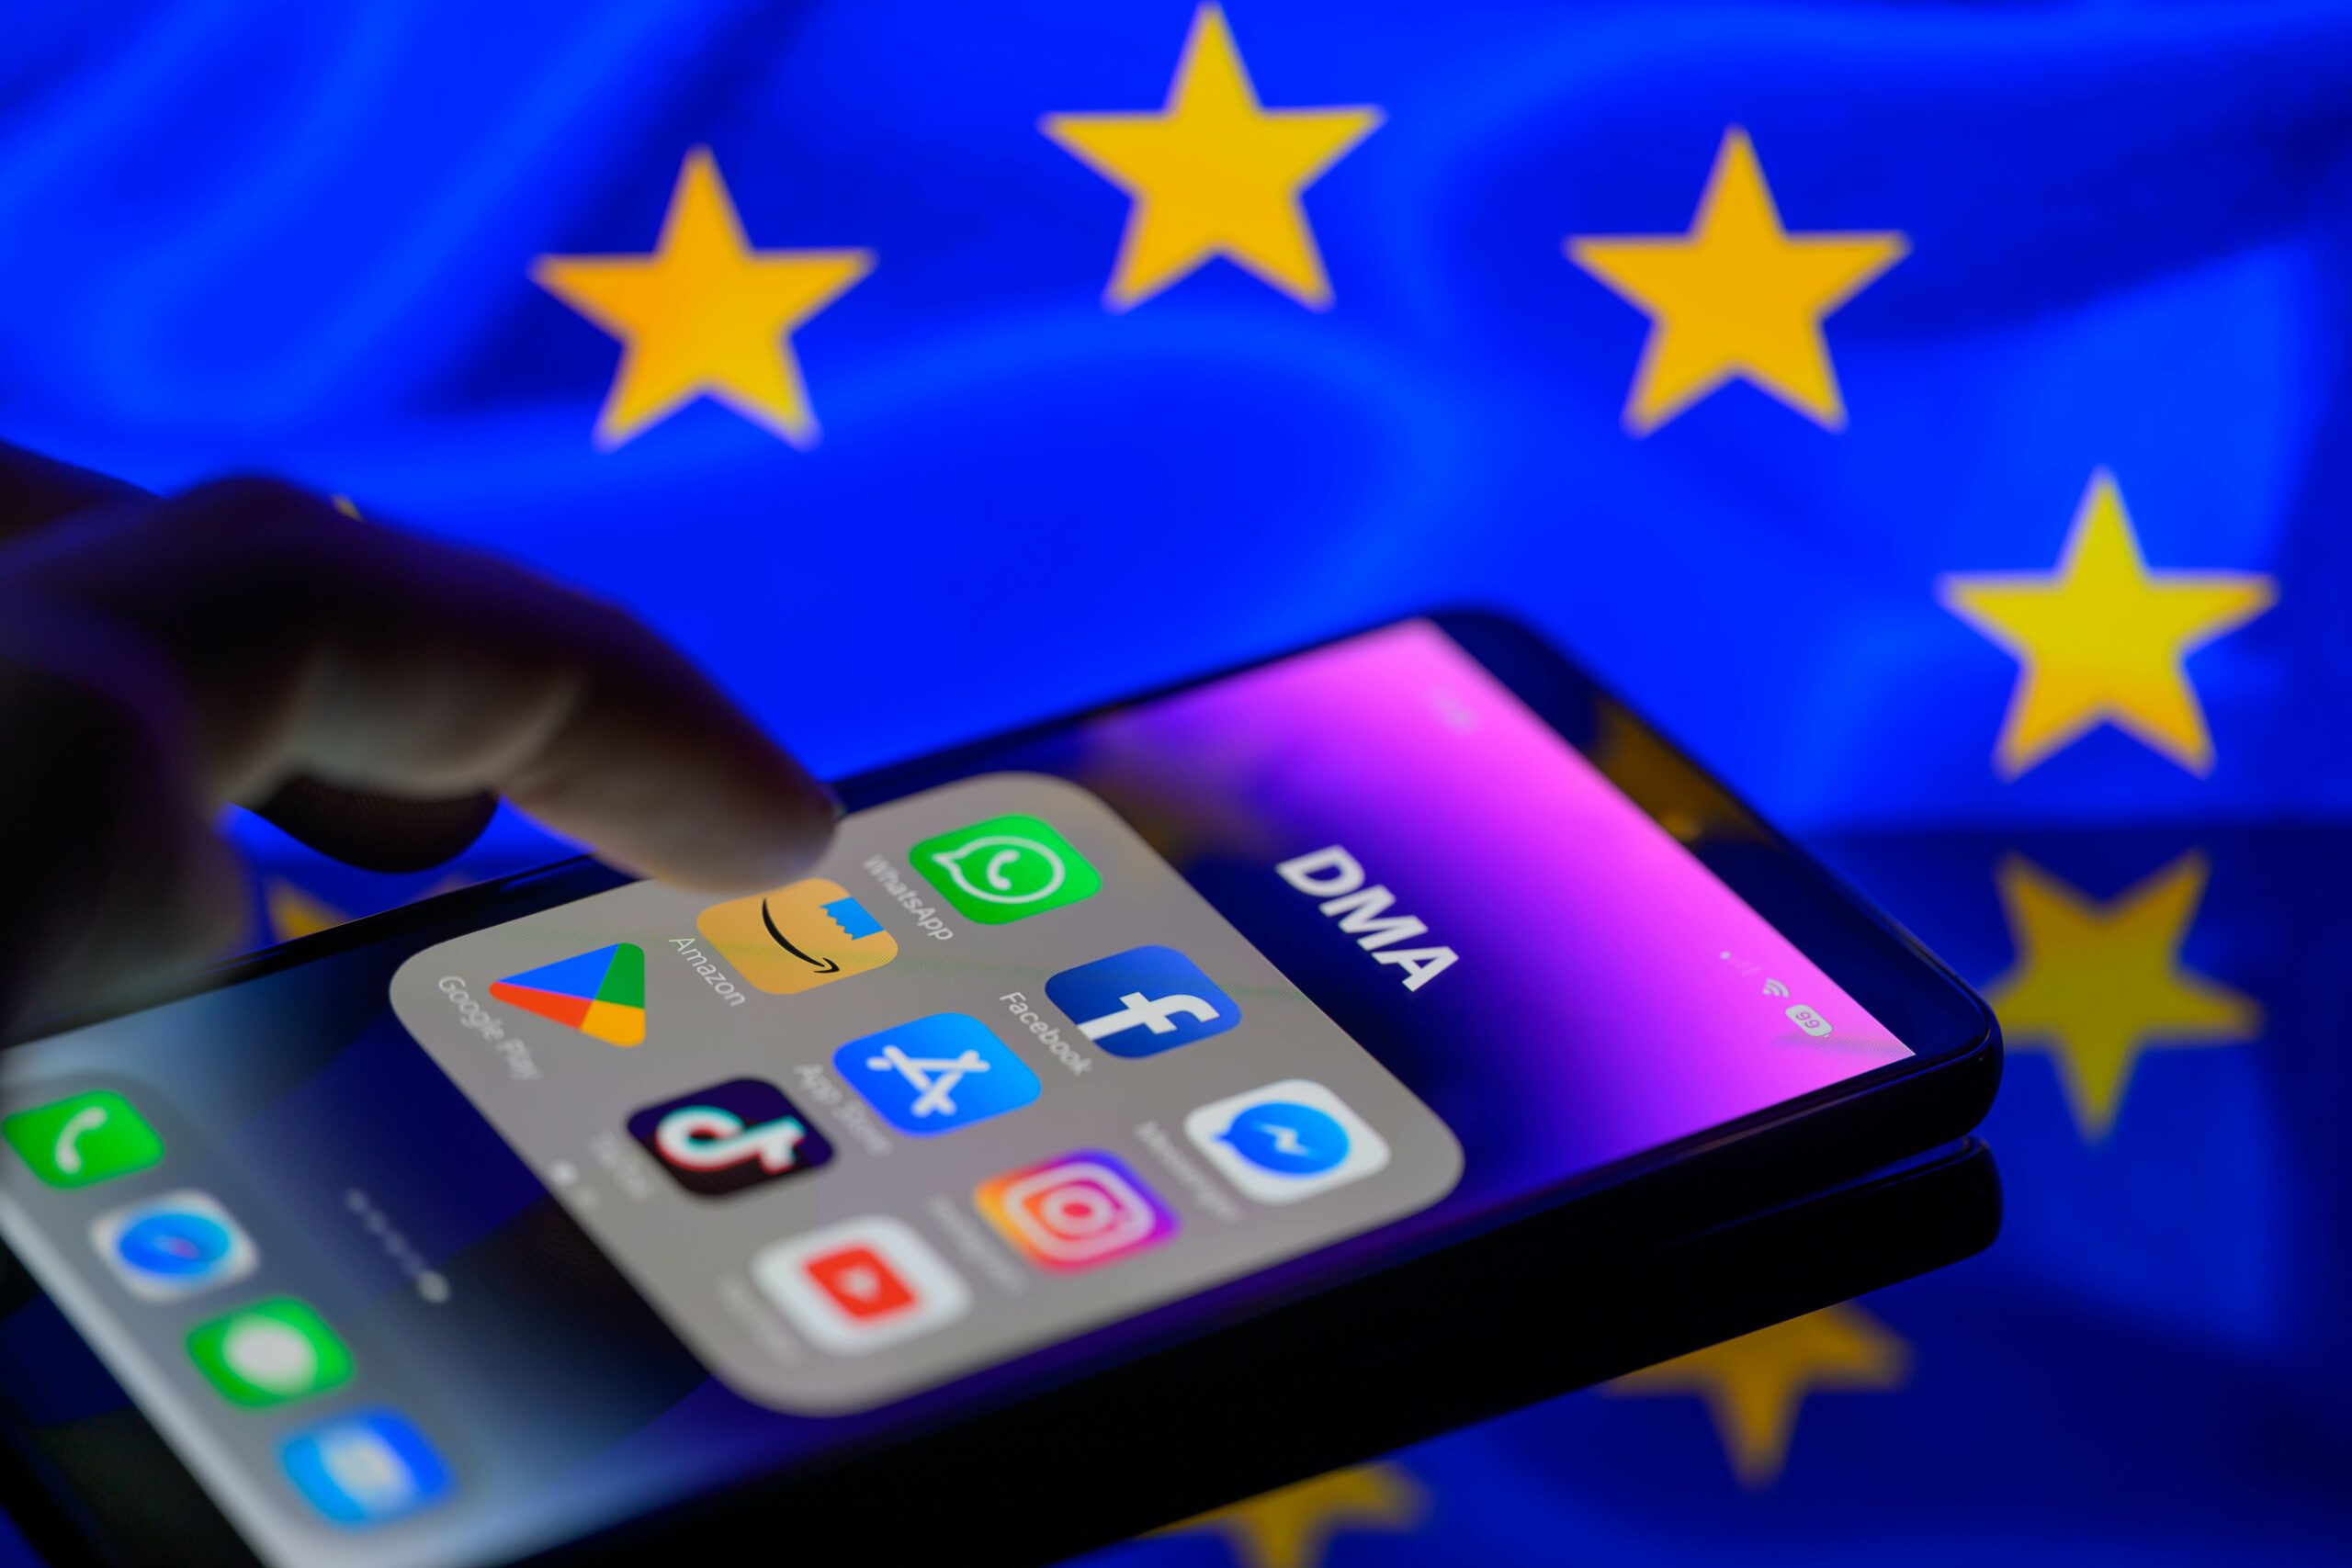 iPhone with apps, EU flag in the background